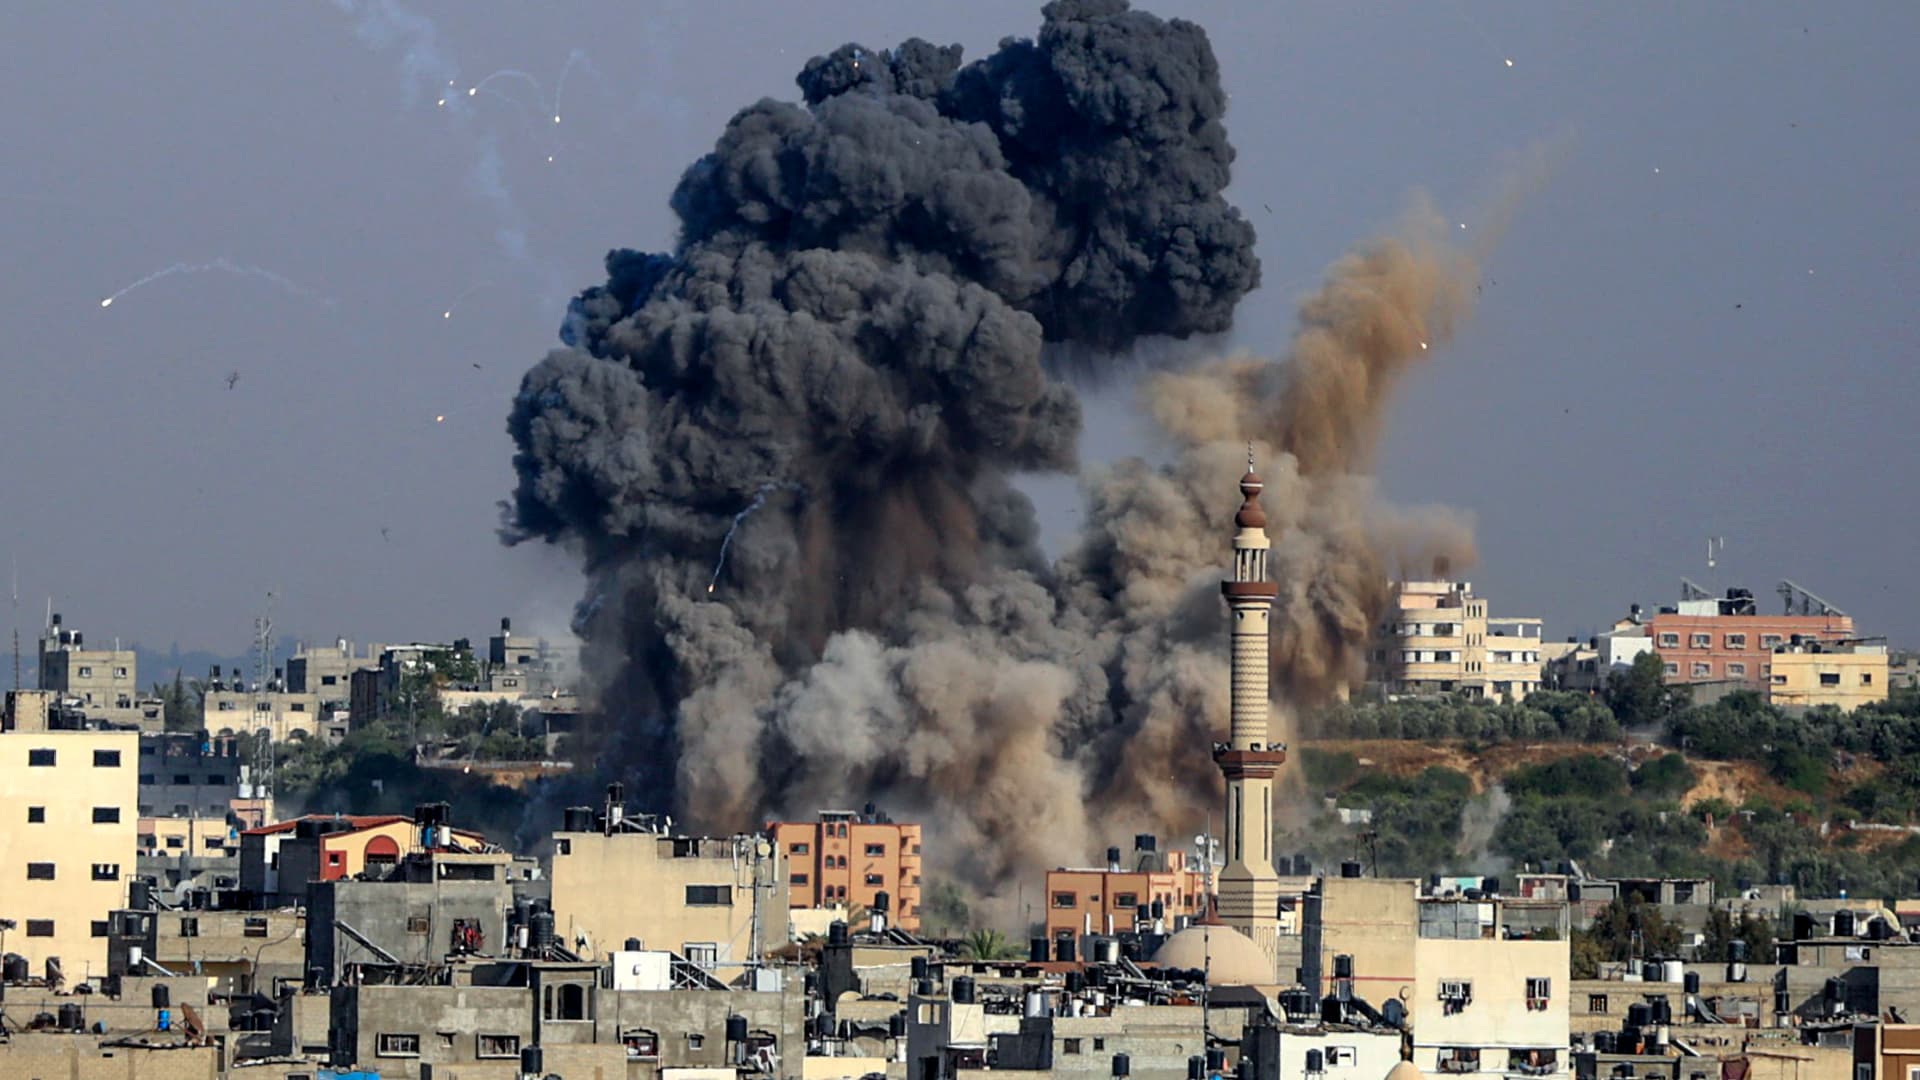 Smoke billows from Israeli air strikes in Gaza City, controlled by the Palestinian Hamas movement, on May 11, 2021.